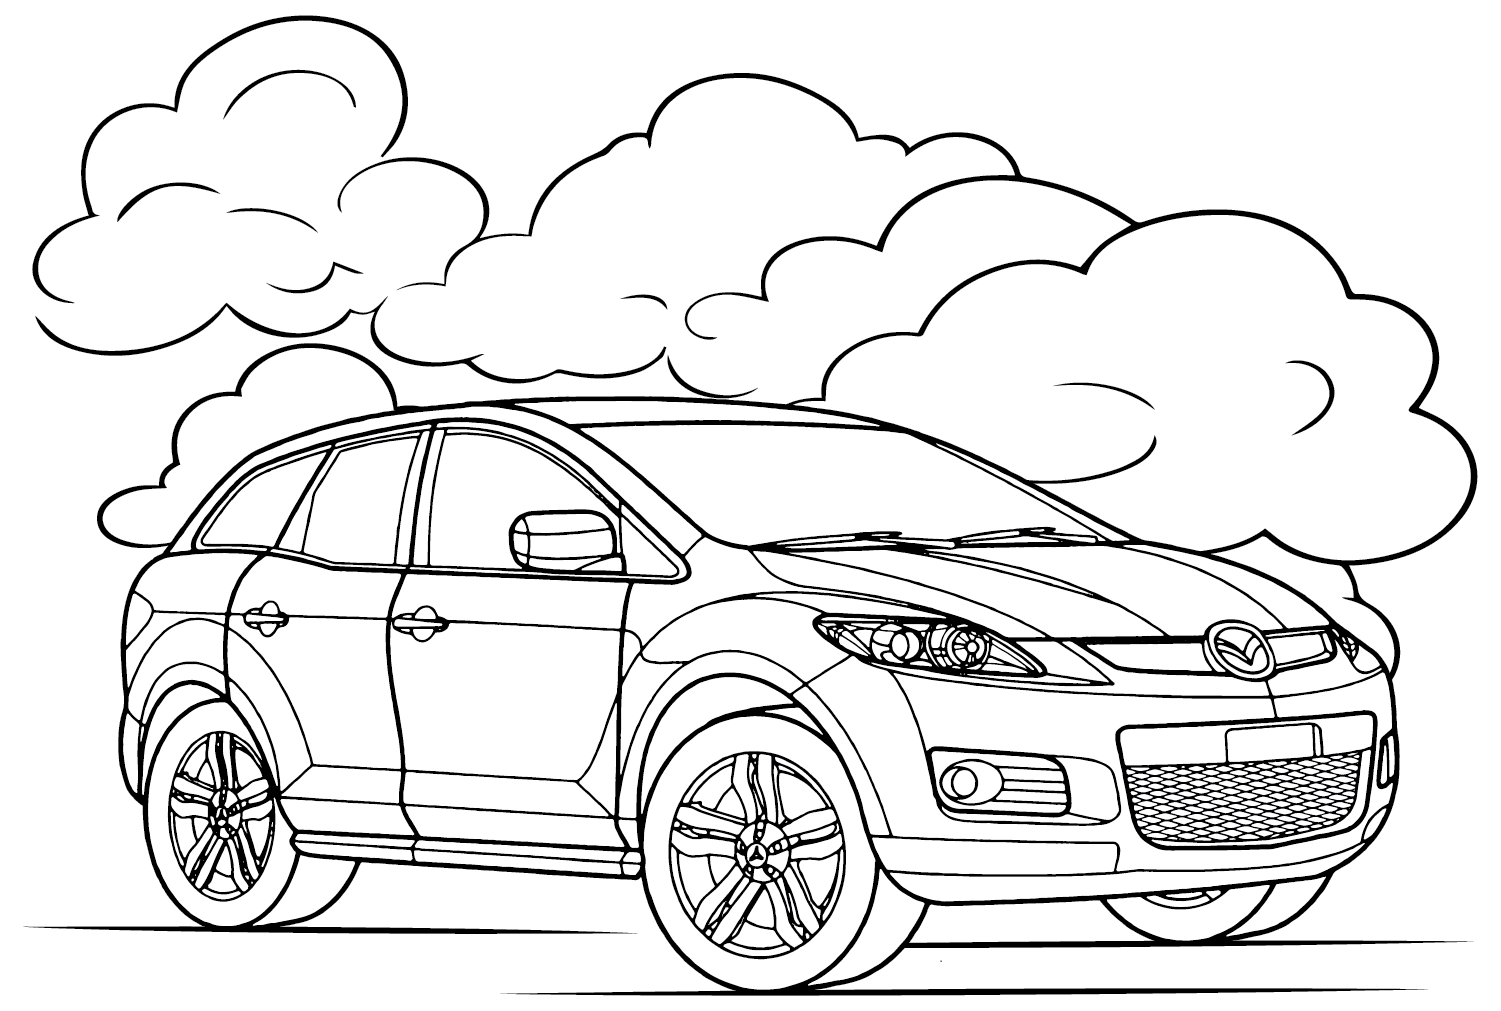 Mazda CX-7 Coloring Page from Mazda